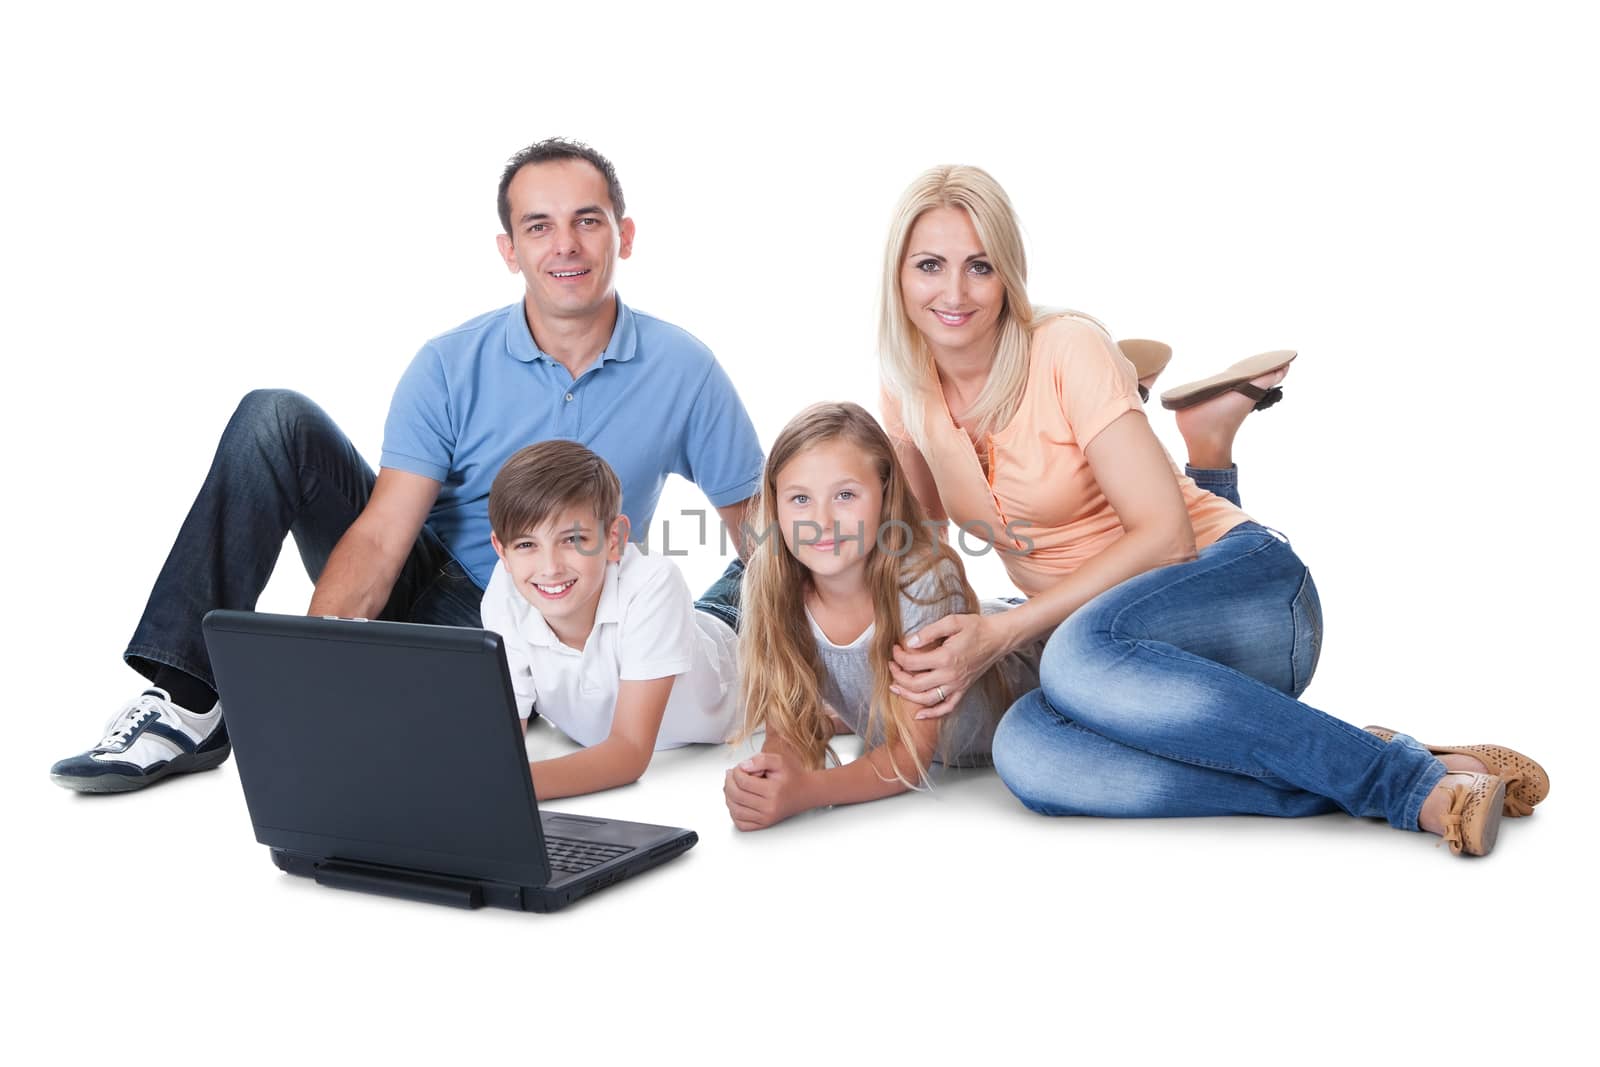 A Happy Family With Two Children Using Laptop Isolated On White Background